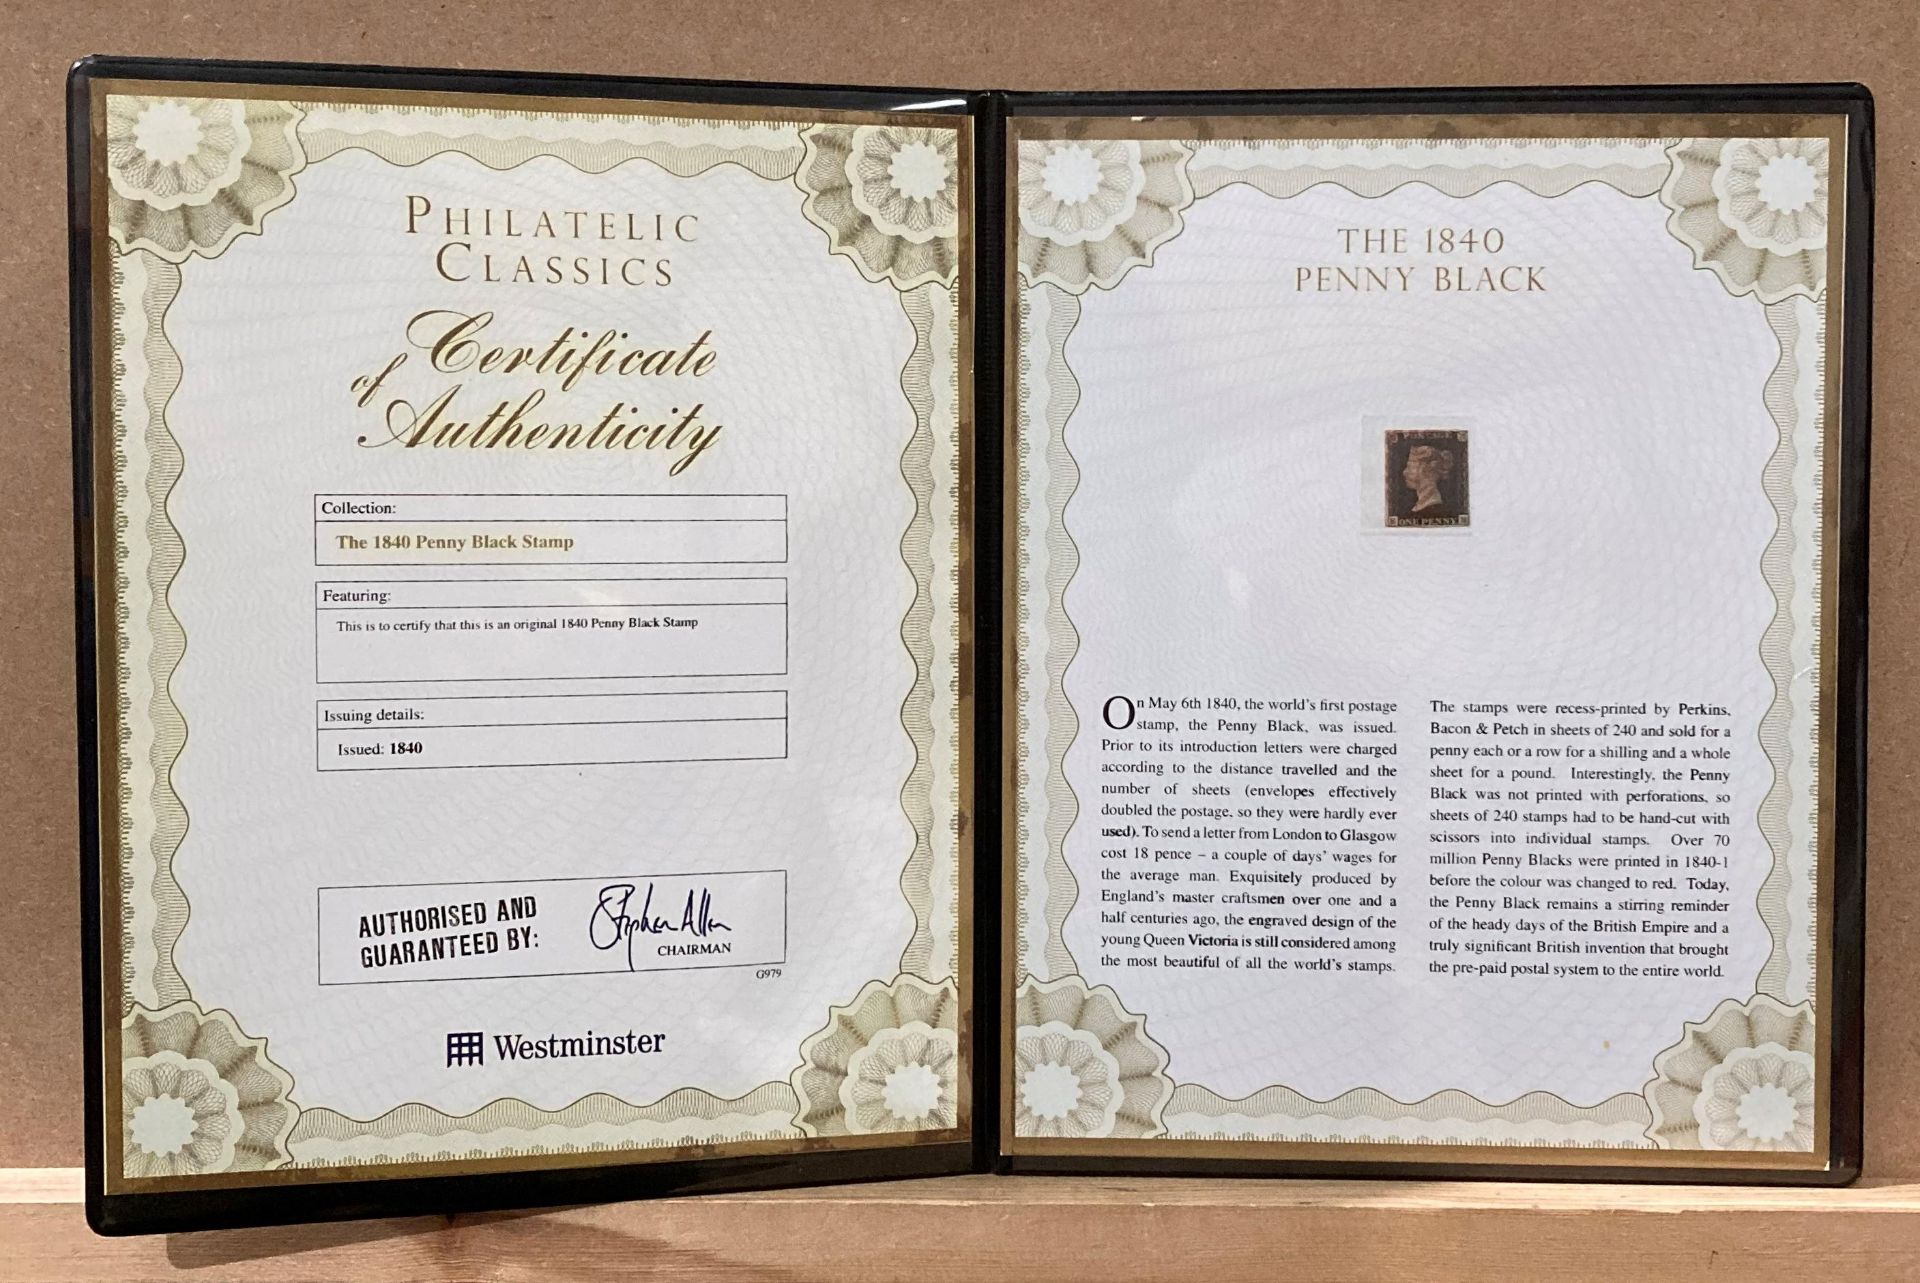 A Westminster 'The 1840 Penny Black' stamp in folder with certificate of authenticity (Saleroom